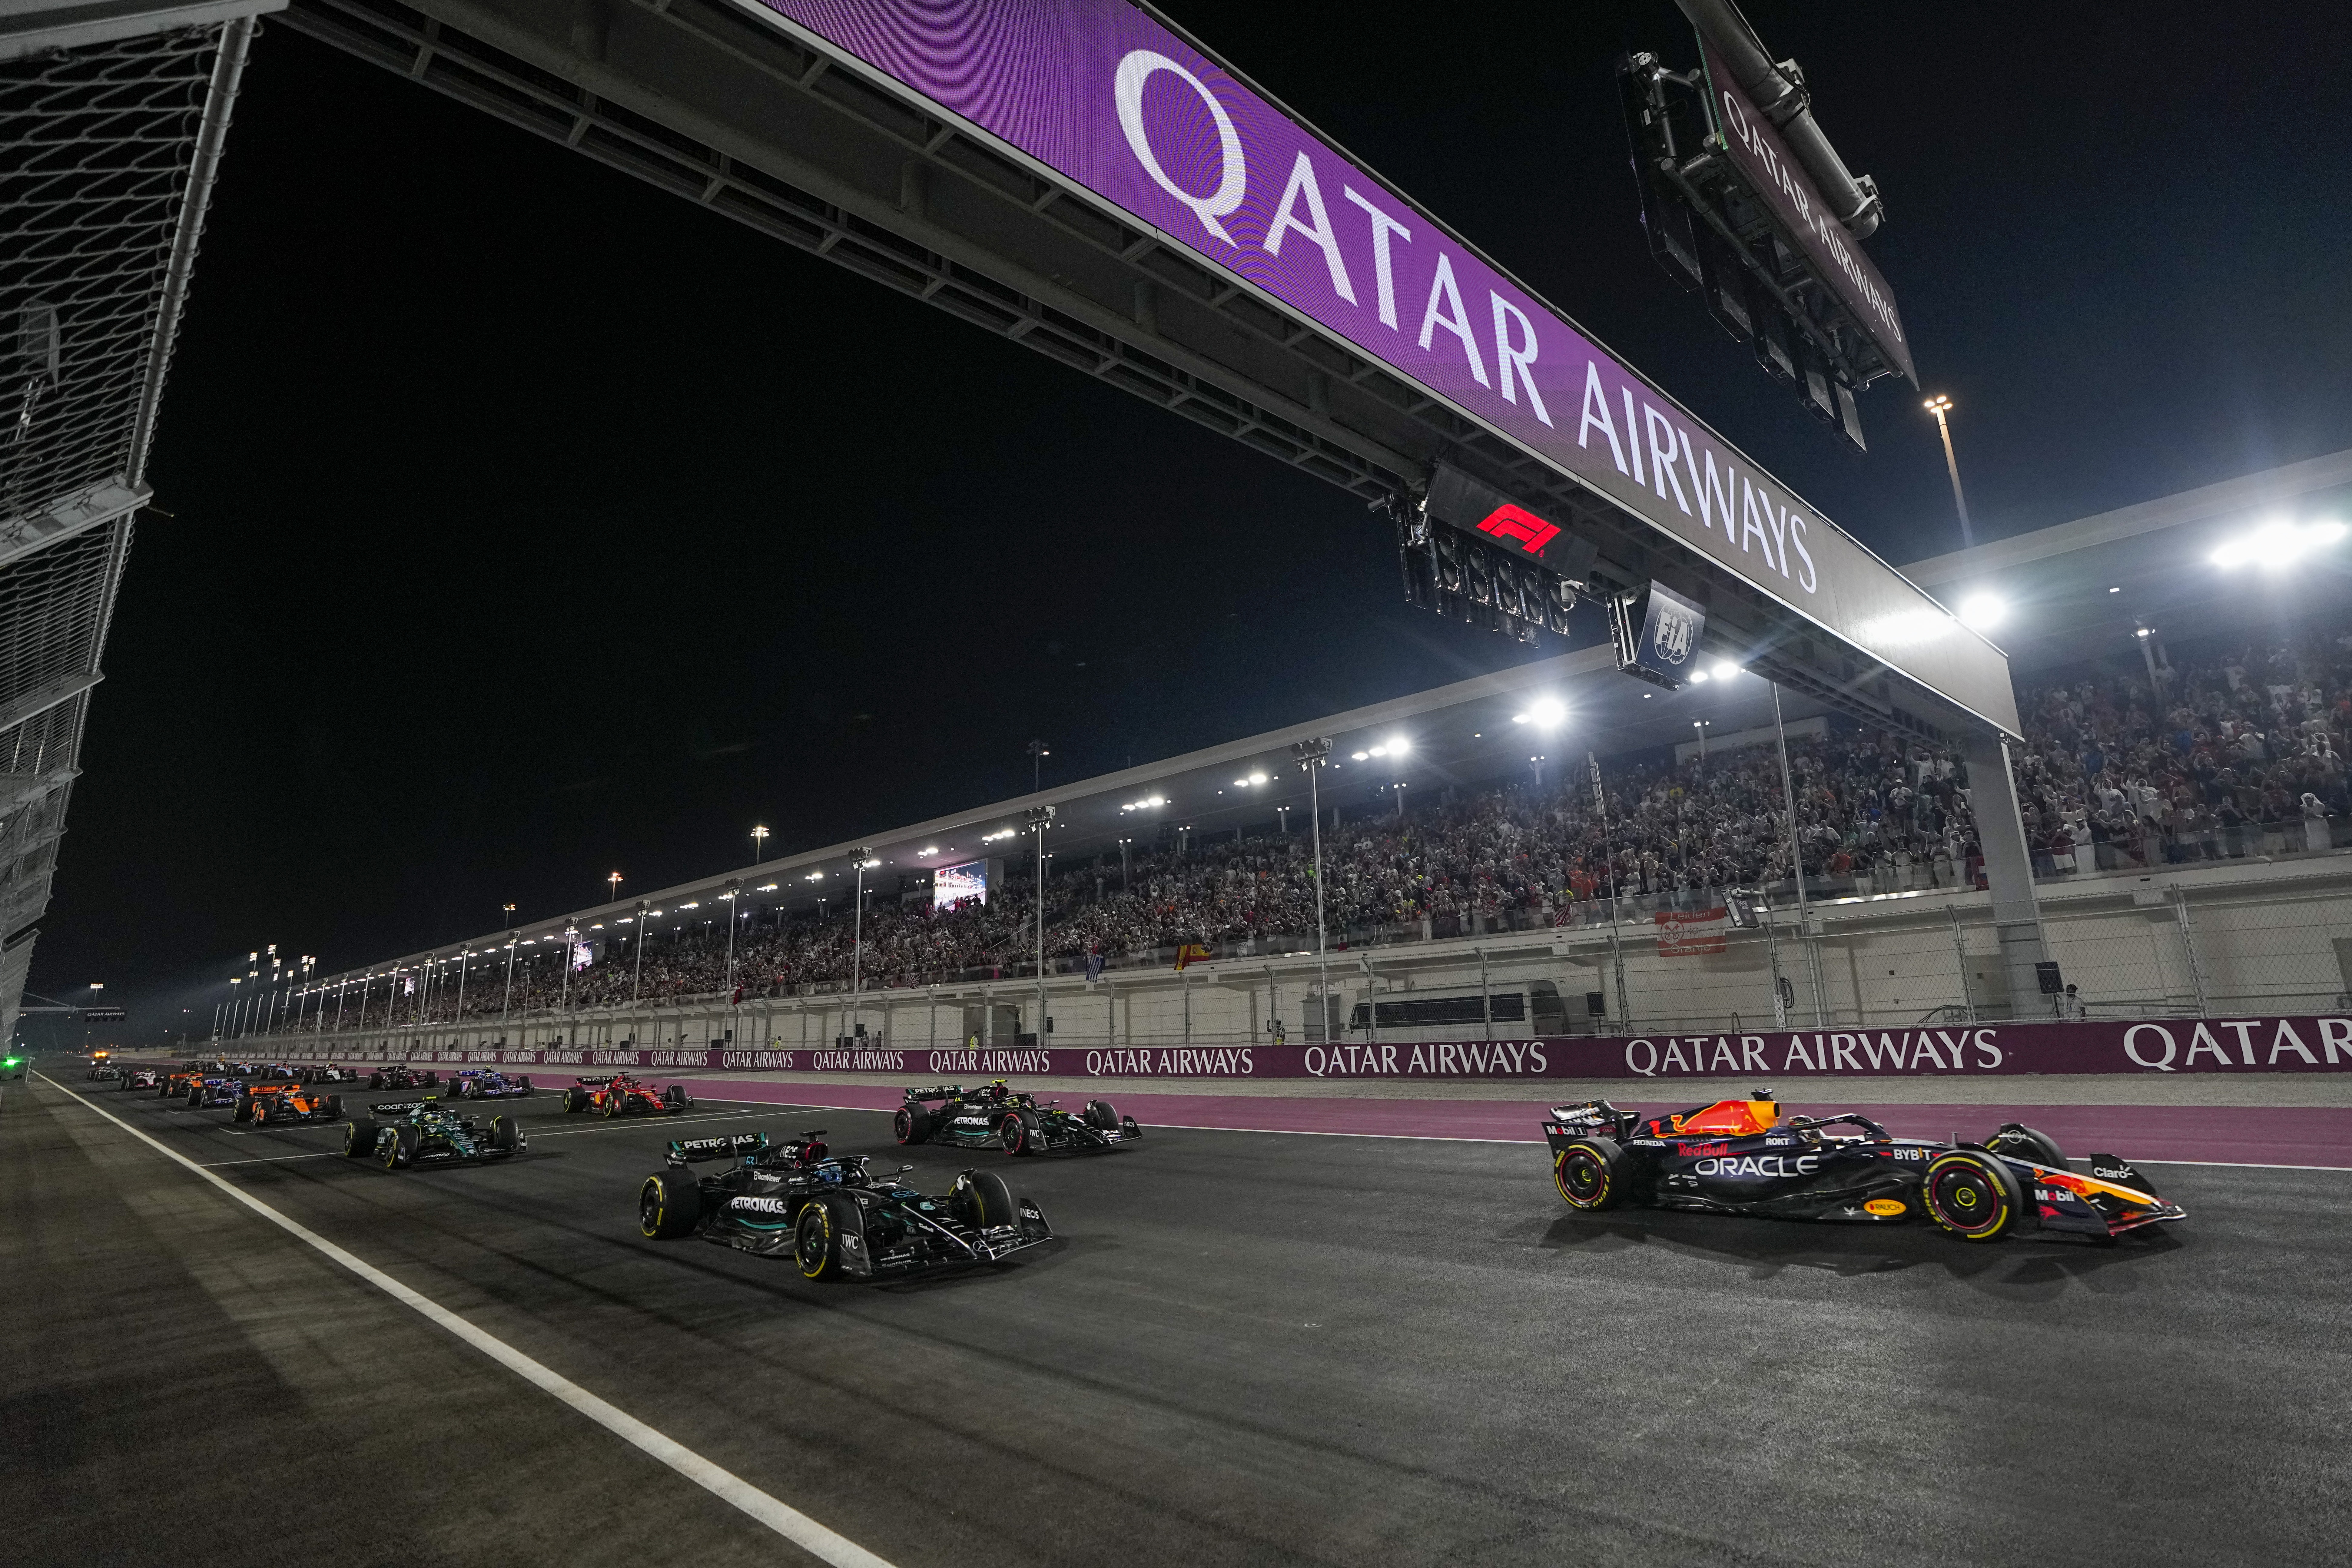 Max Verstappen leads from pole in Qatar